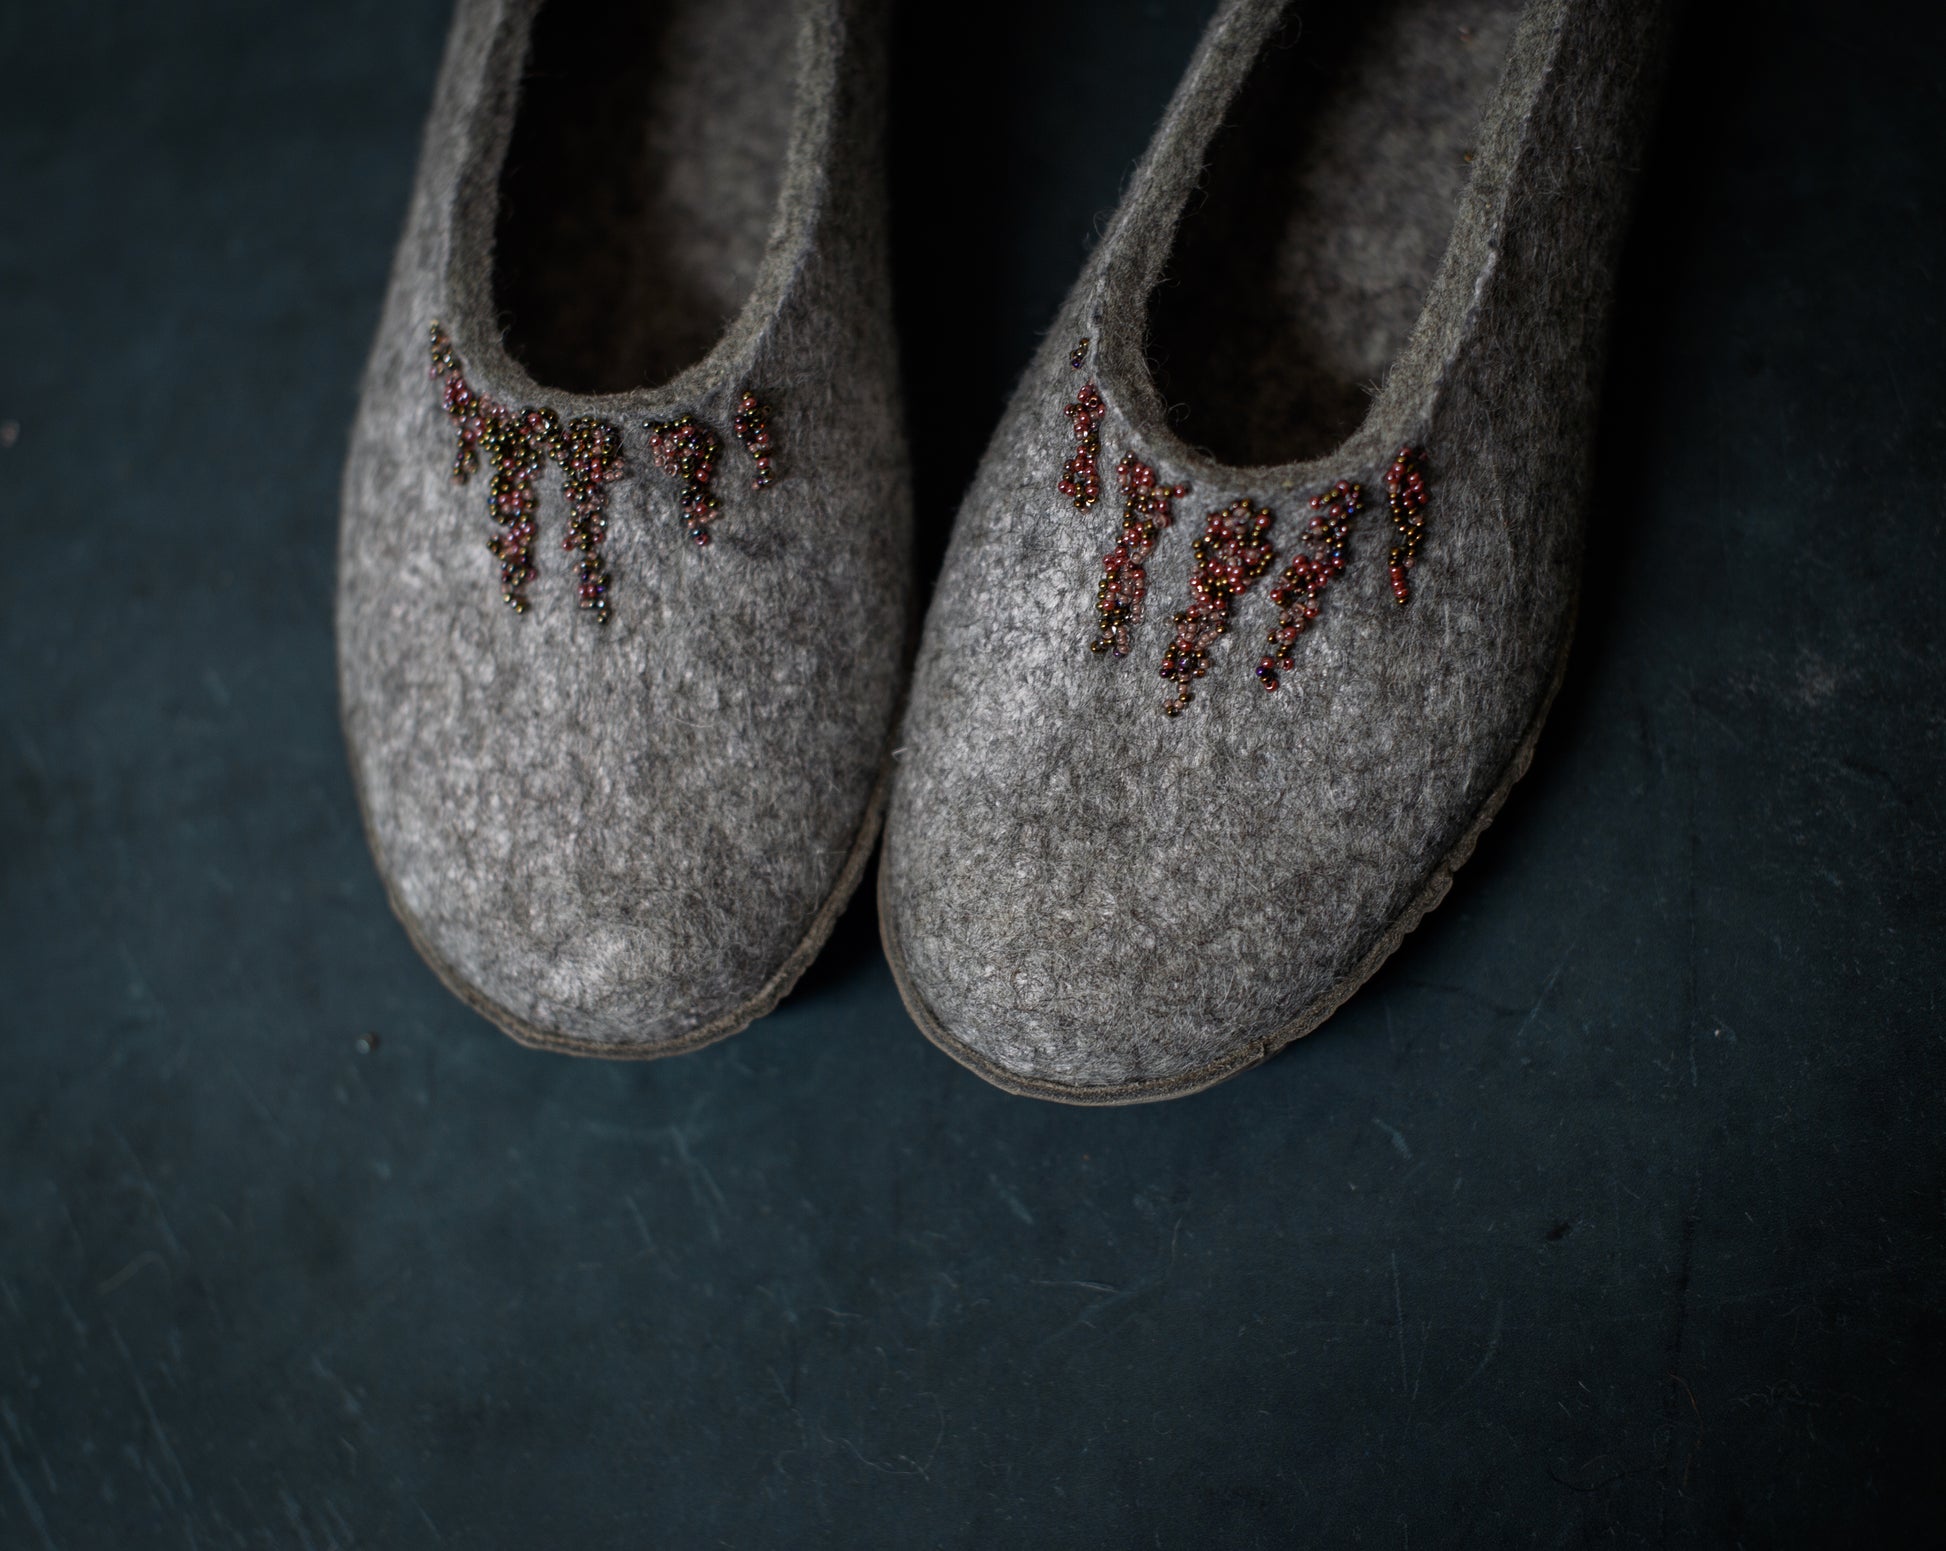 [felted_slippers],[wool_slippers], [burebure_slippers], [warm_wool_slippers], MARGOT - Forest Green - Customisable ballerinas slippers, BureBure shoes and slippers